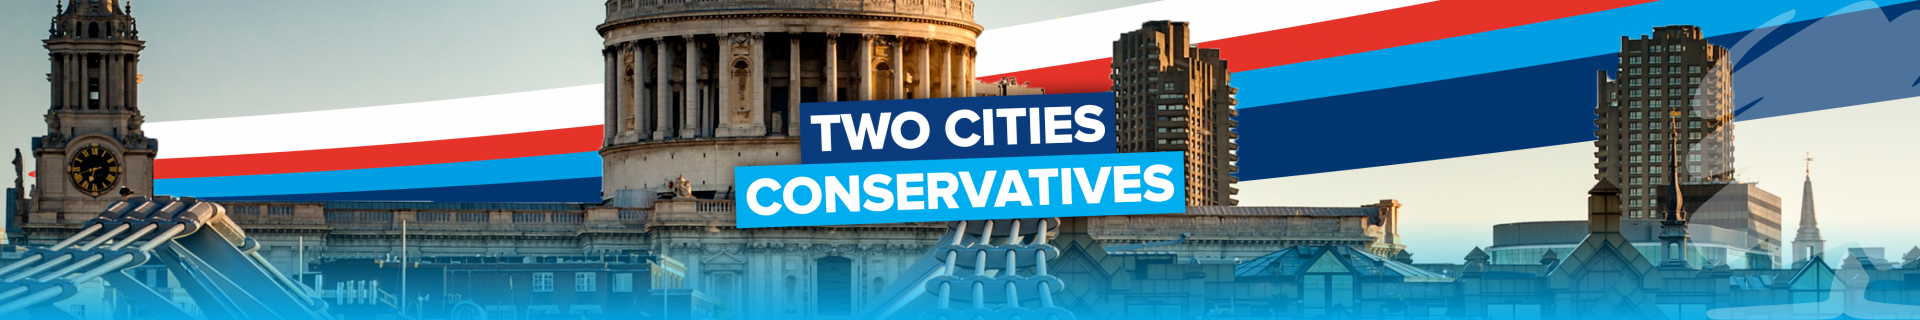 Banner image for Cities of London & Westminster